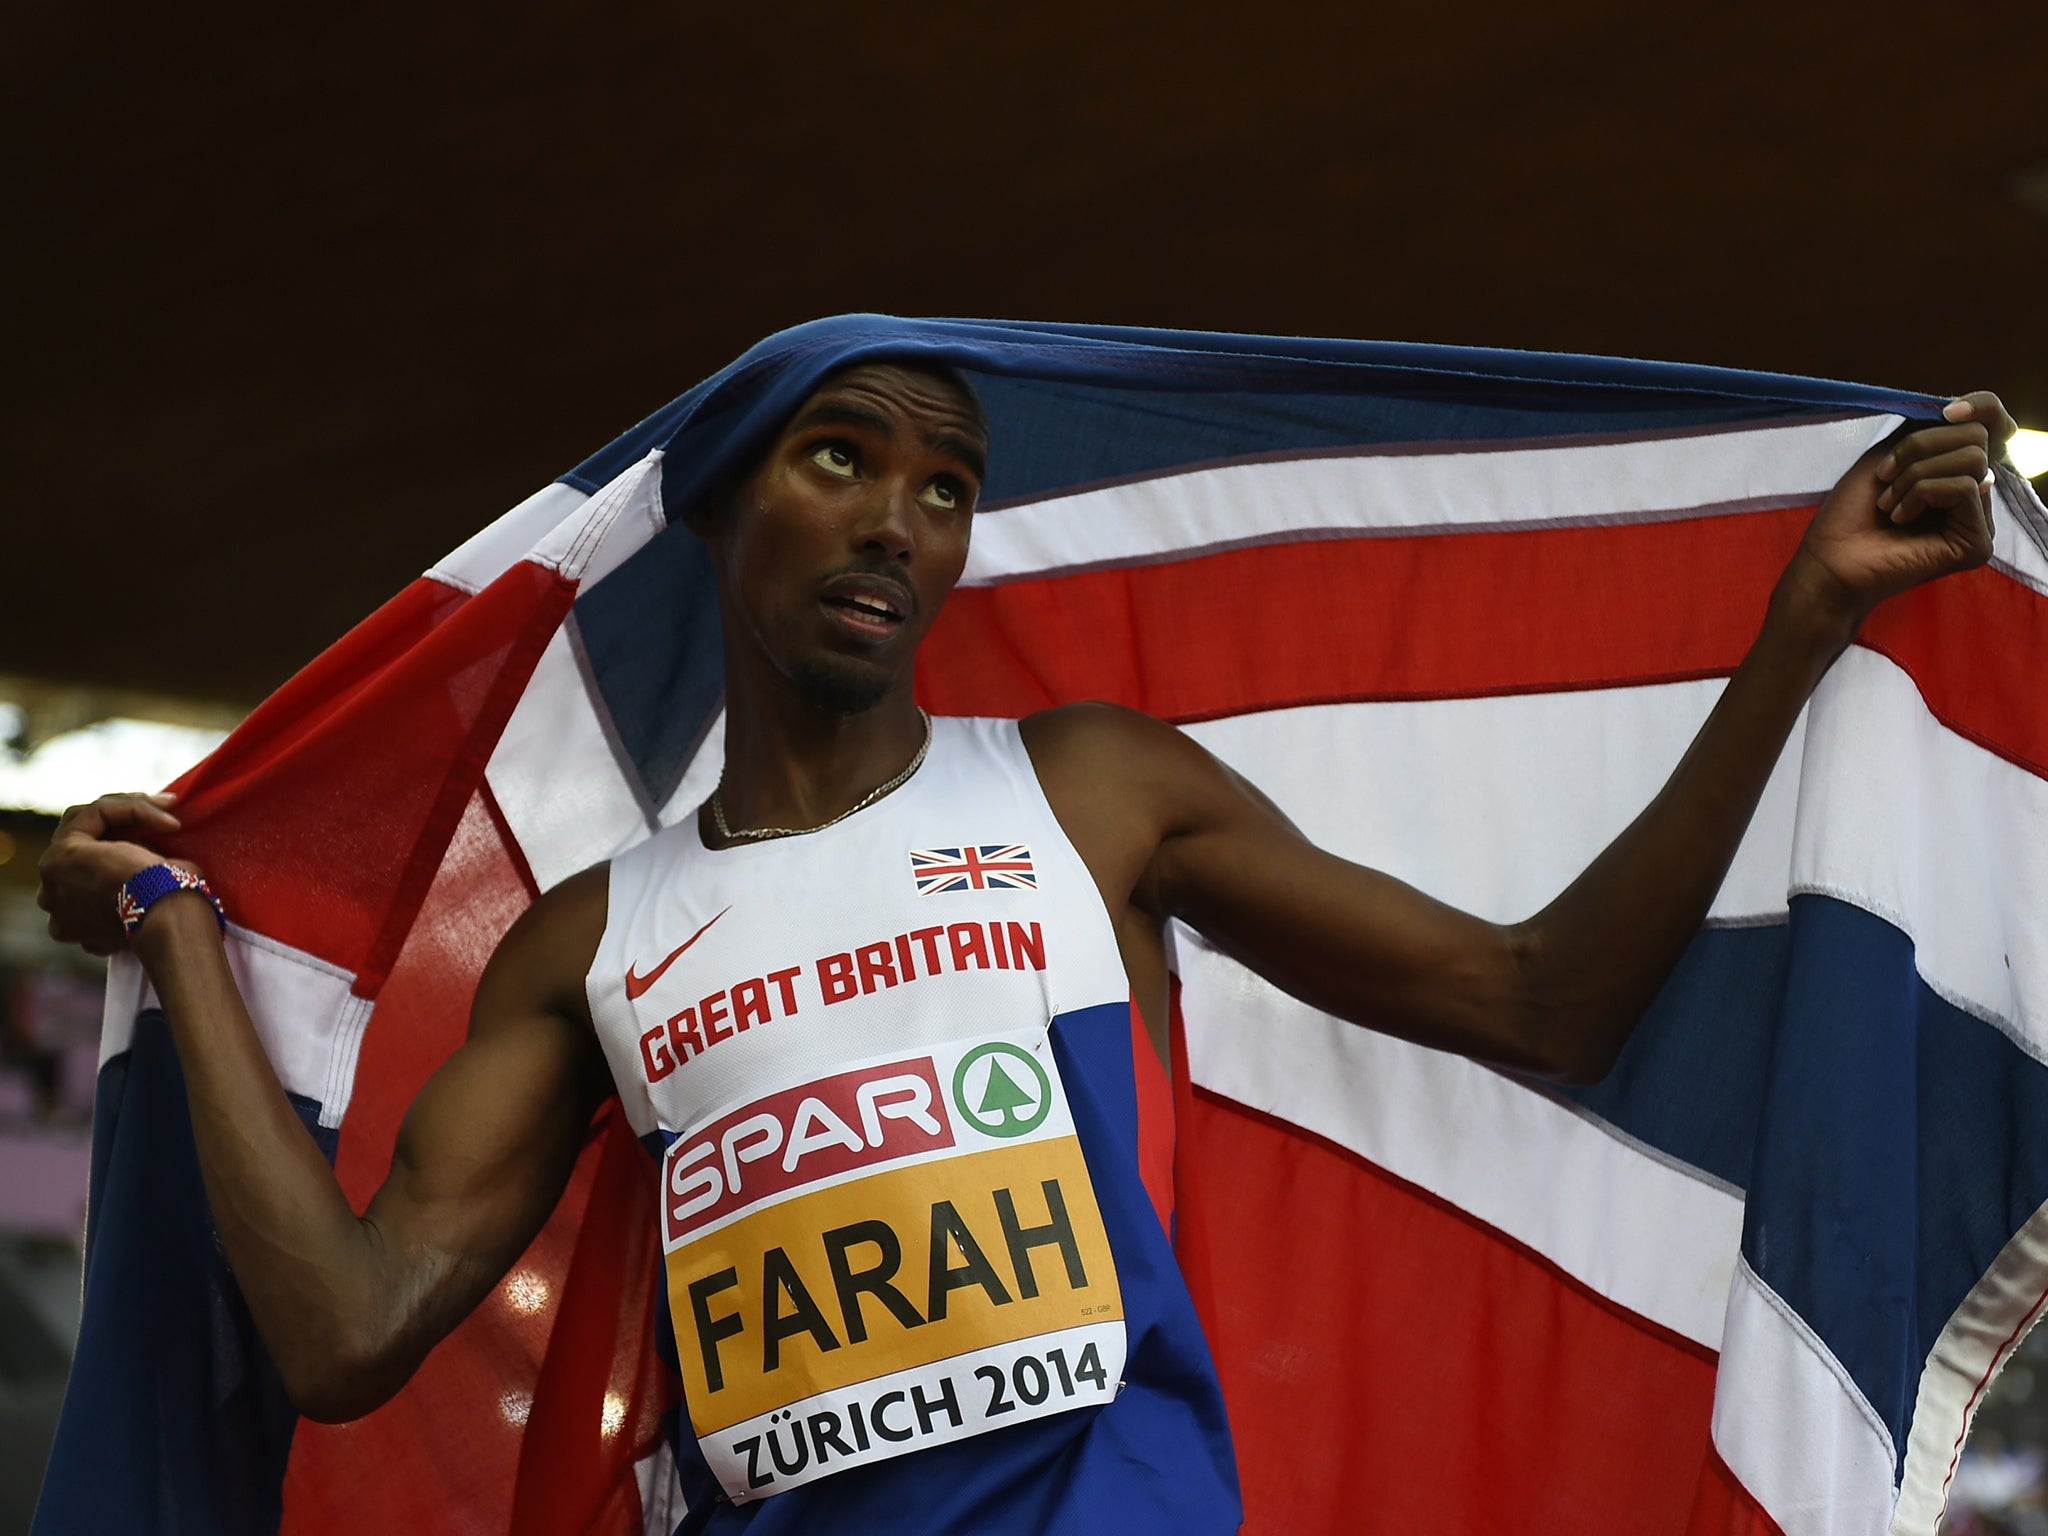 Great Britain's Mohamed Farah, holding his national flag, celebrates after winning the Men's 5000m final